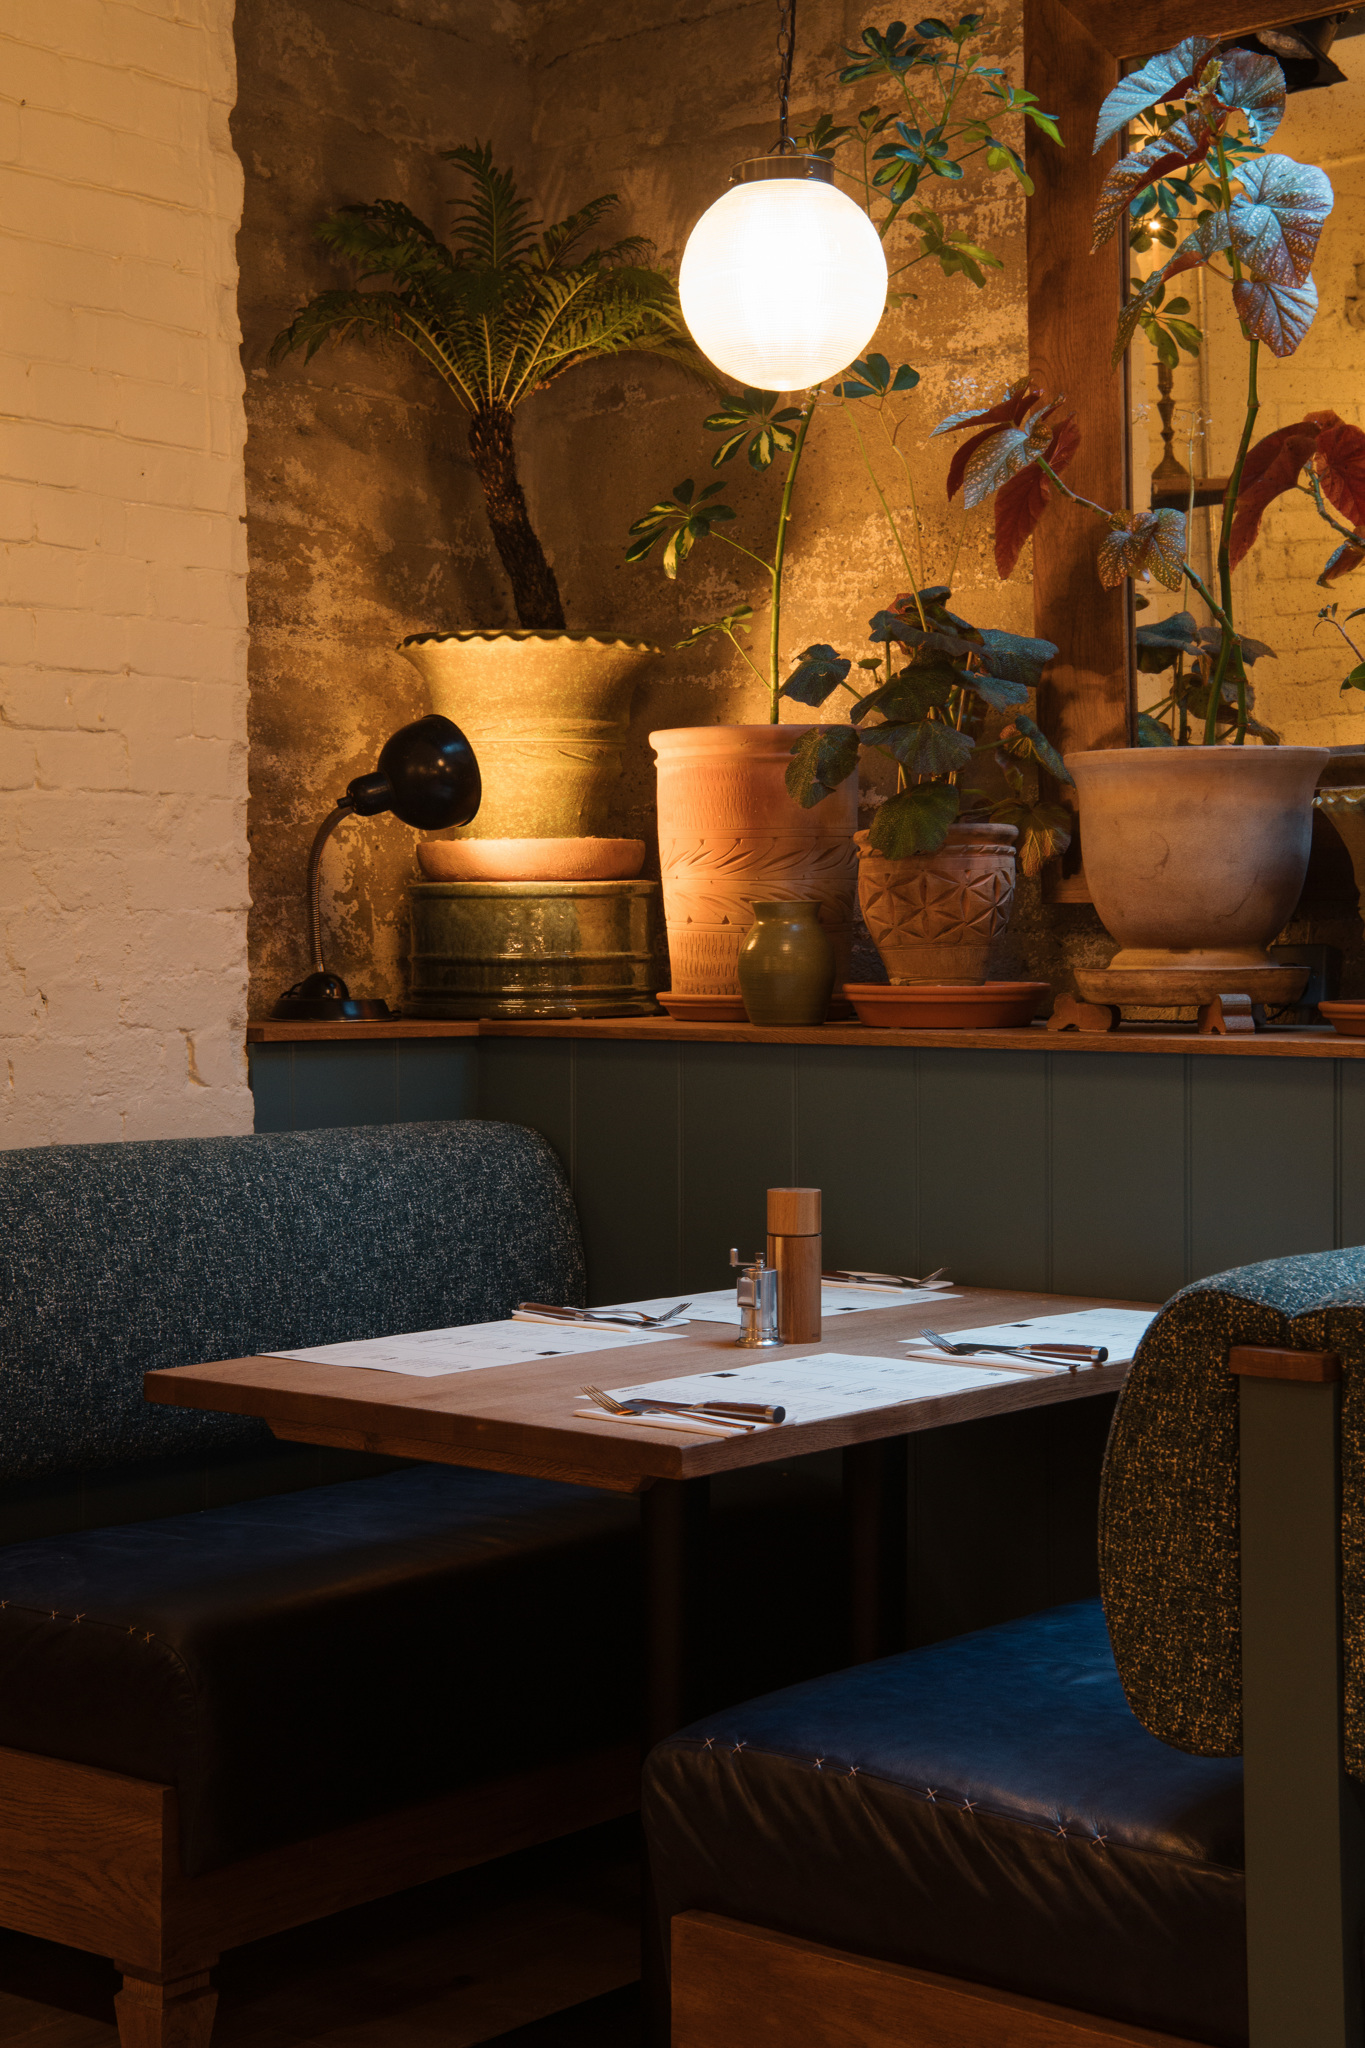 Banquette with leather upholstery with warm lighting, exposed bricks and lots of plants.